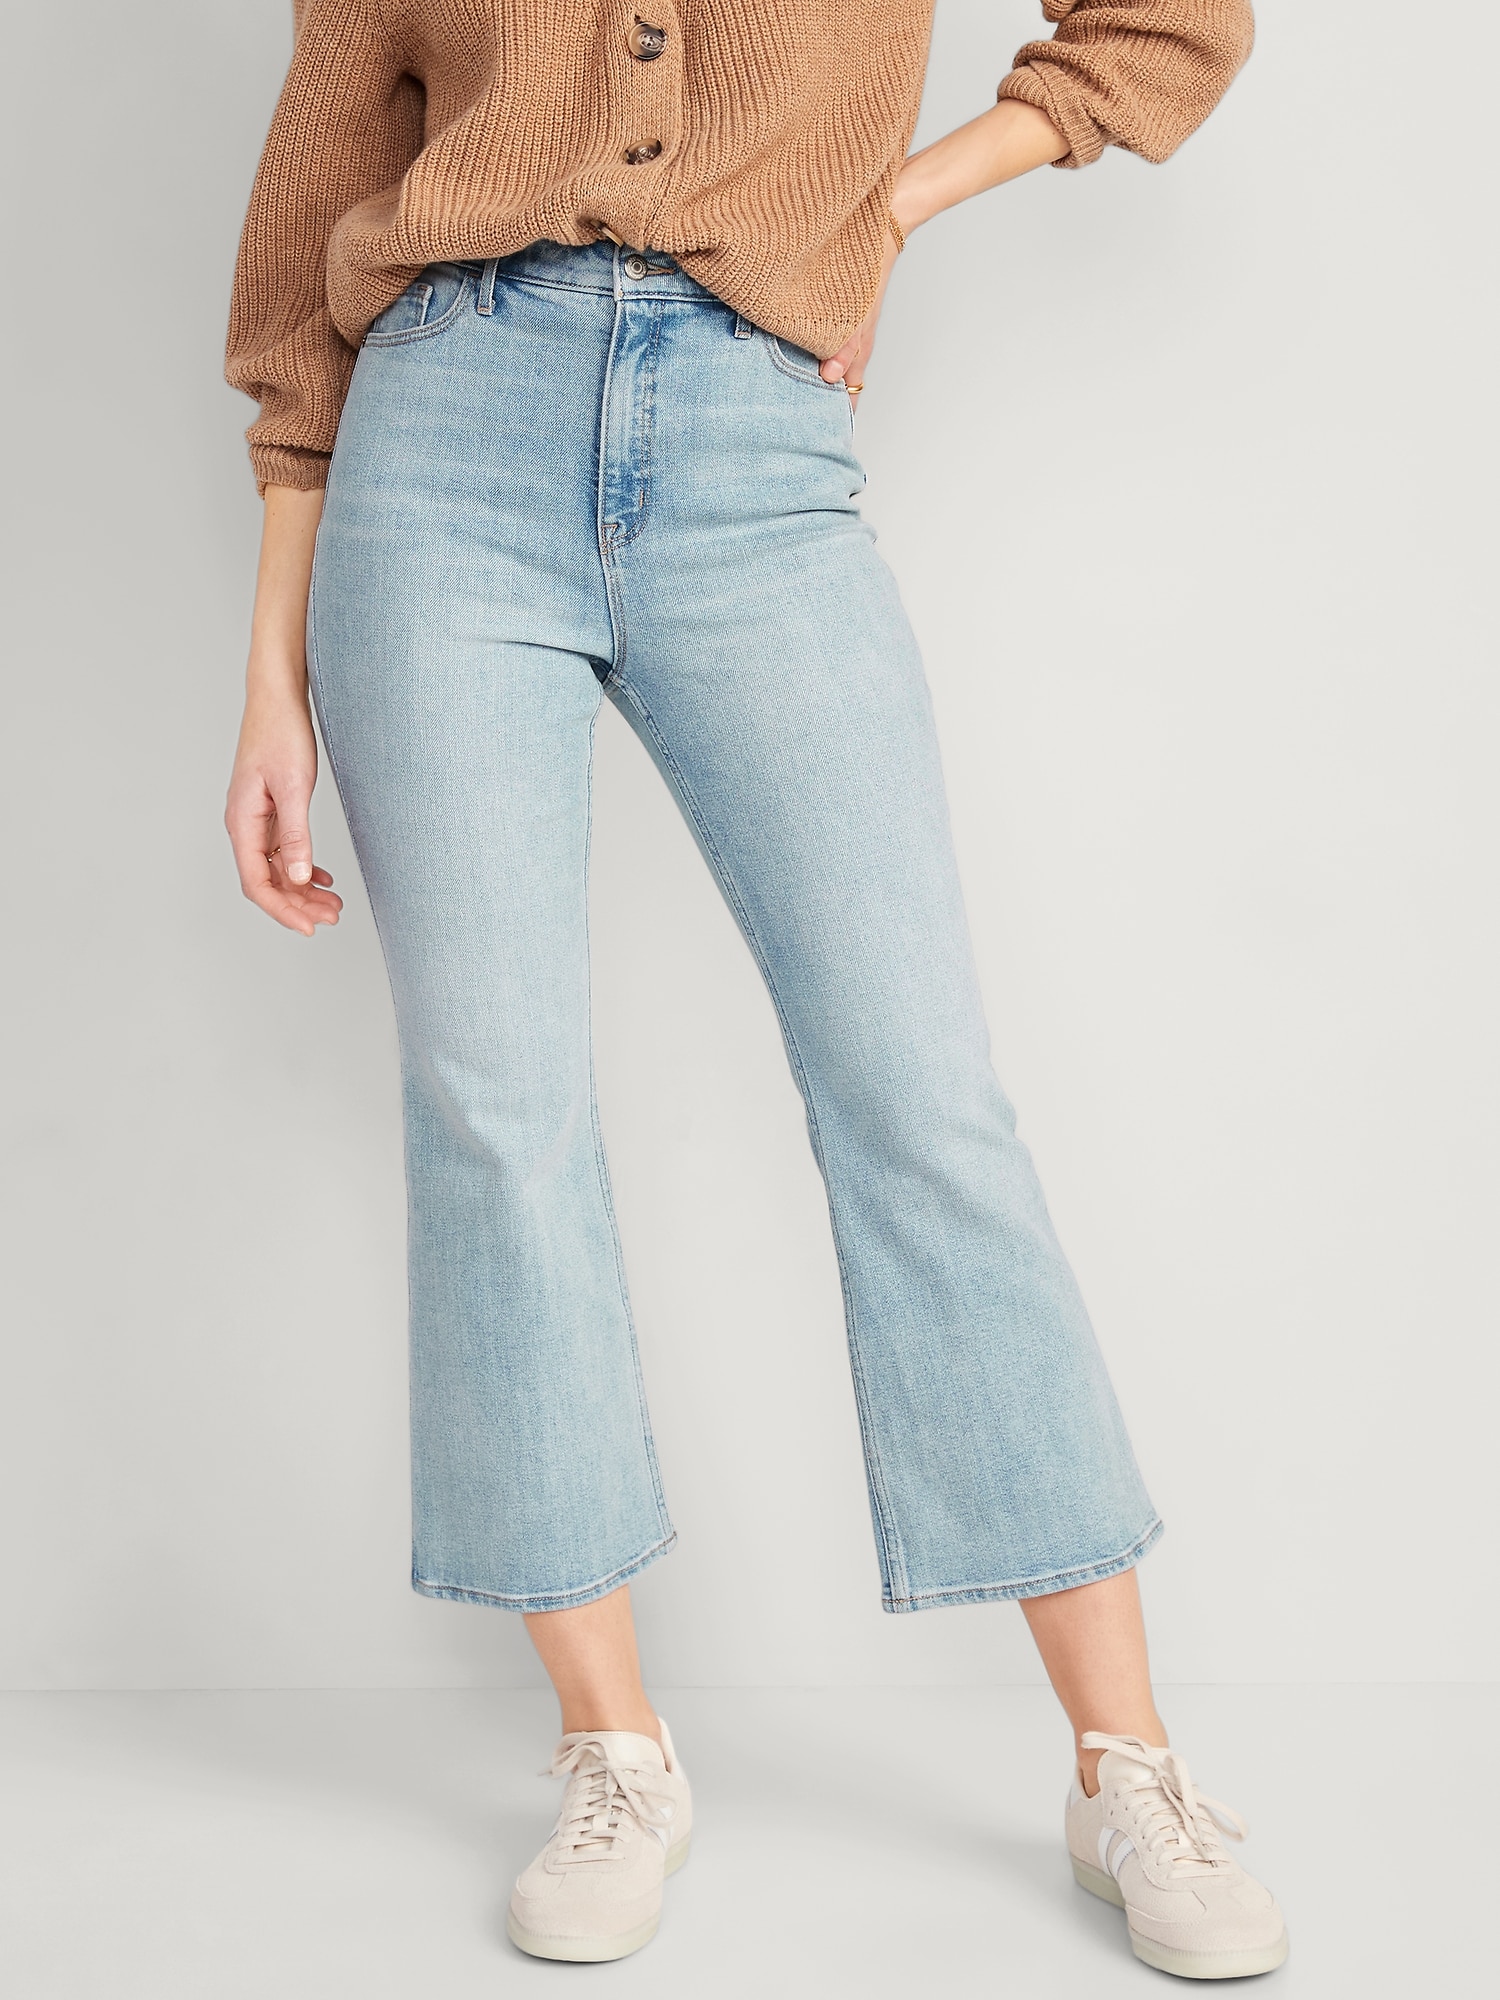 Old Navy Higher High-Waisted Cut-Off Flare Jeans for Women